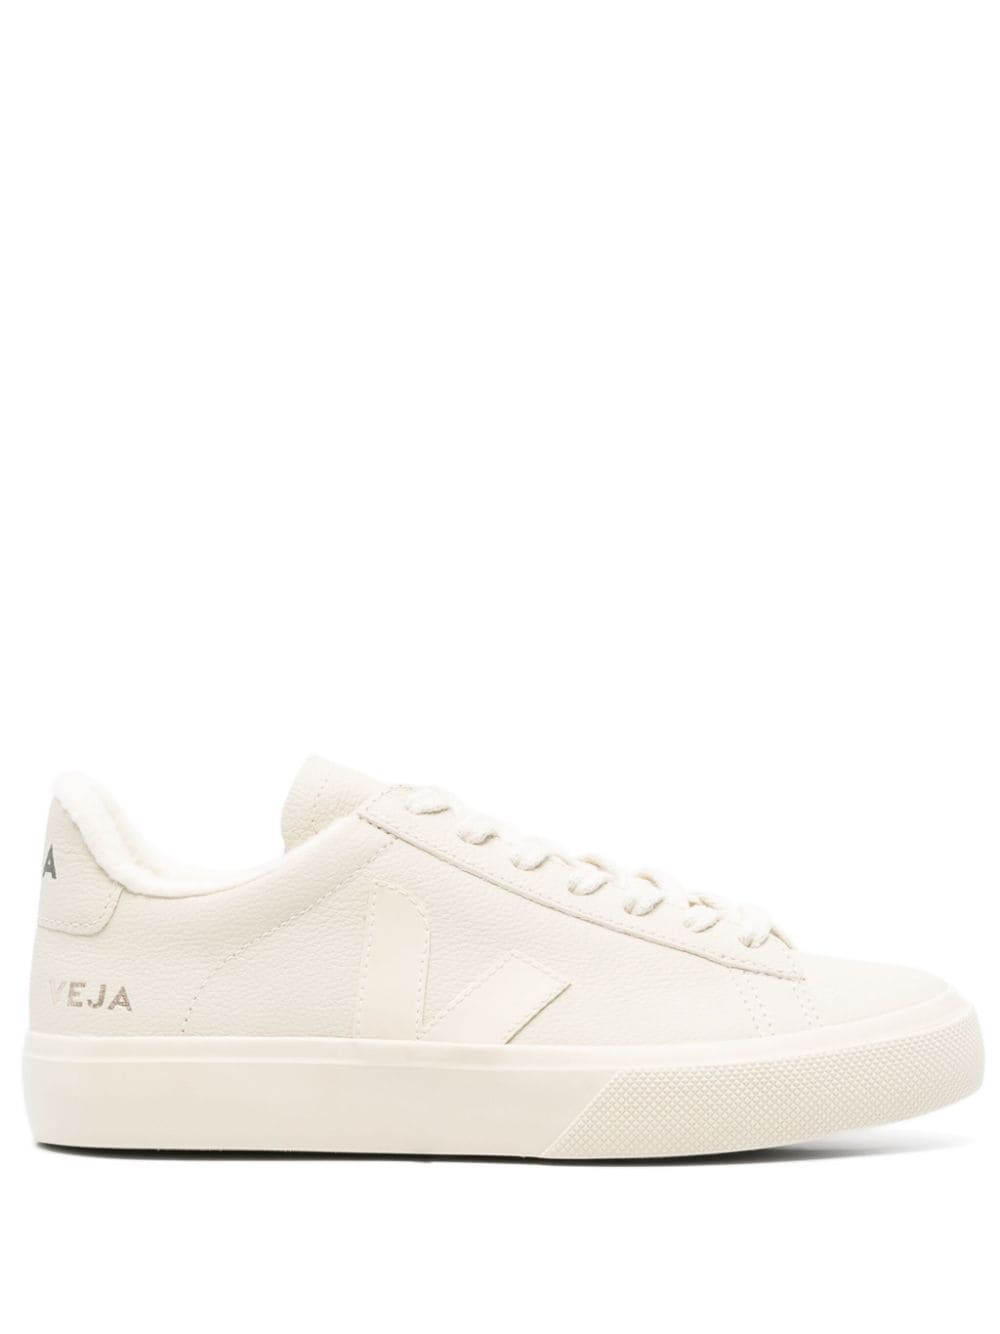 Veja Campo Leather Sneakers In Nude